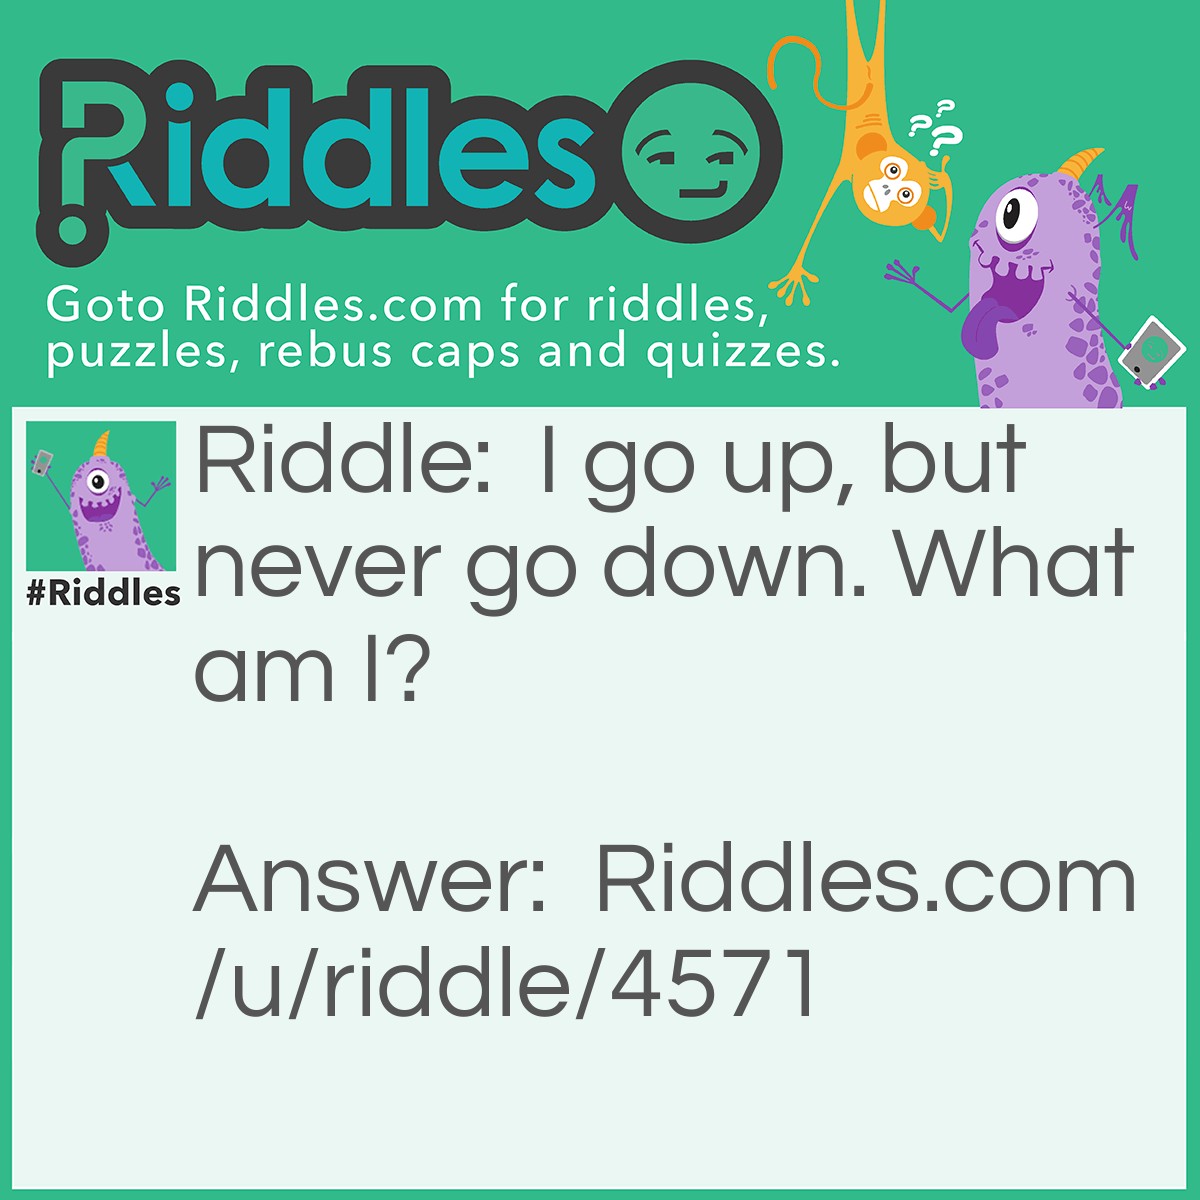 Riddle: I go up, but never go down. What am I? Answer: Your age.